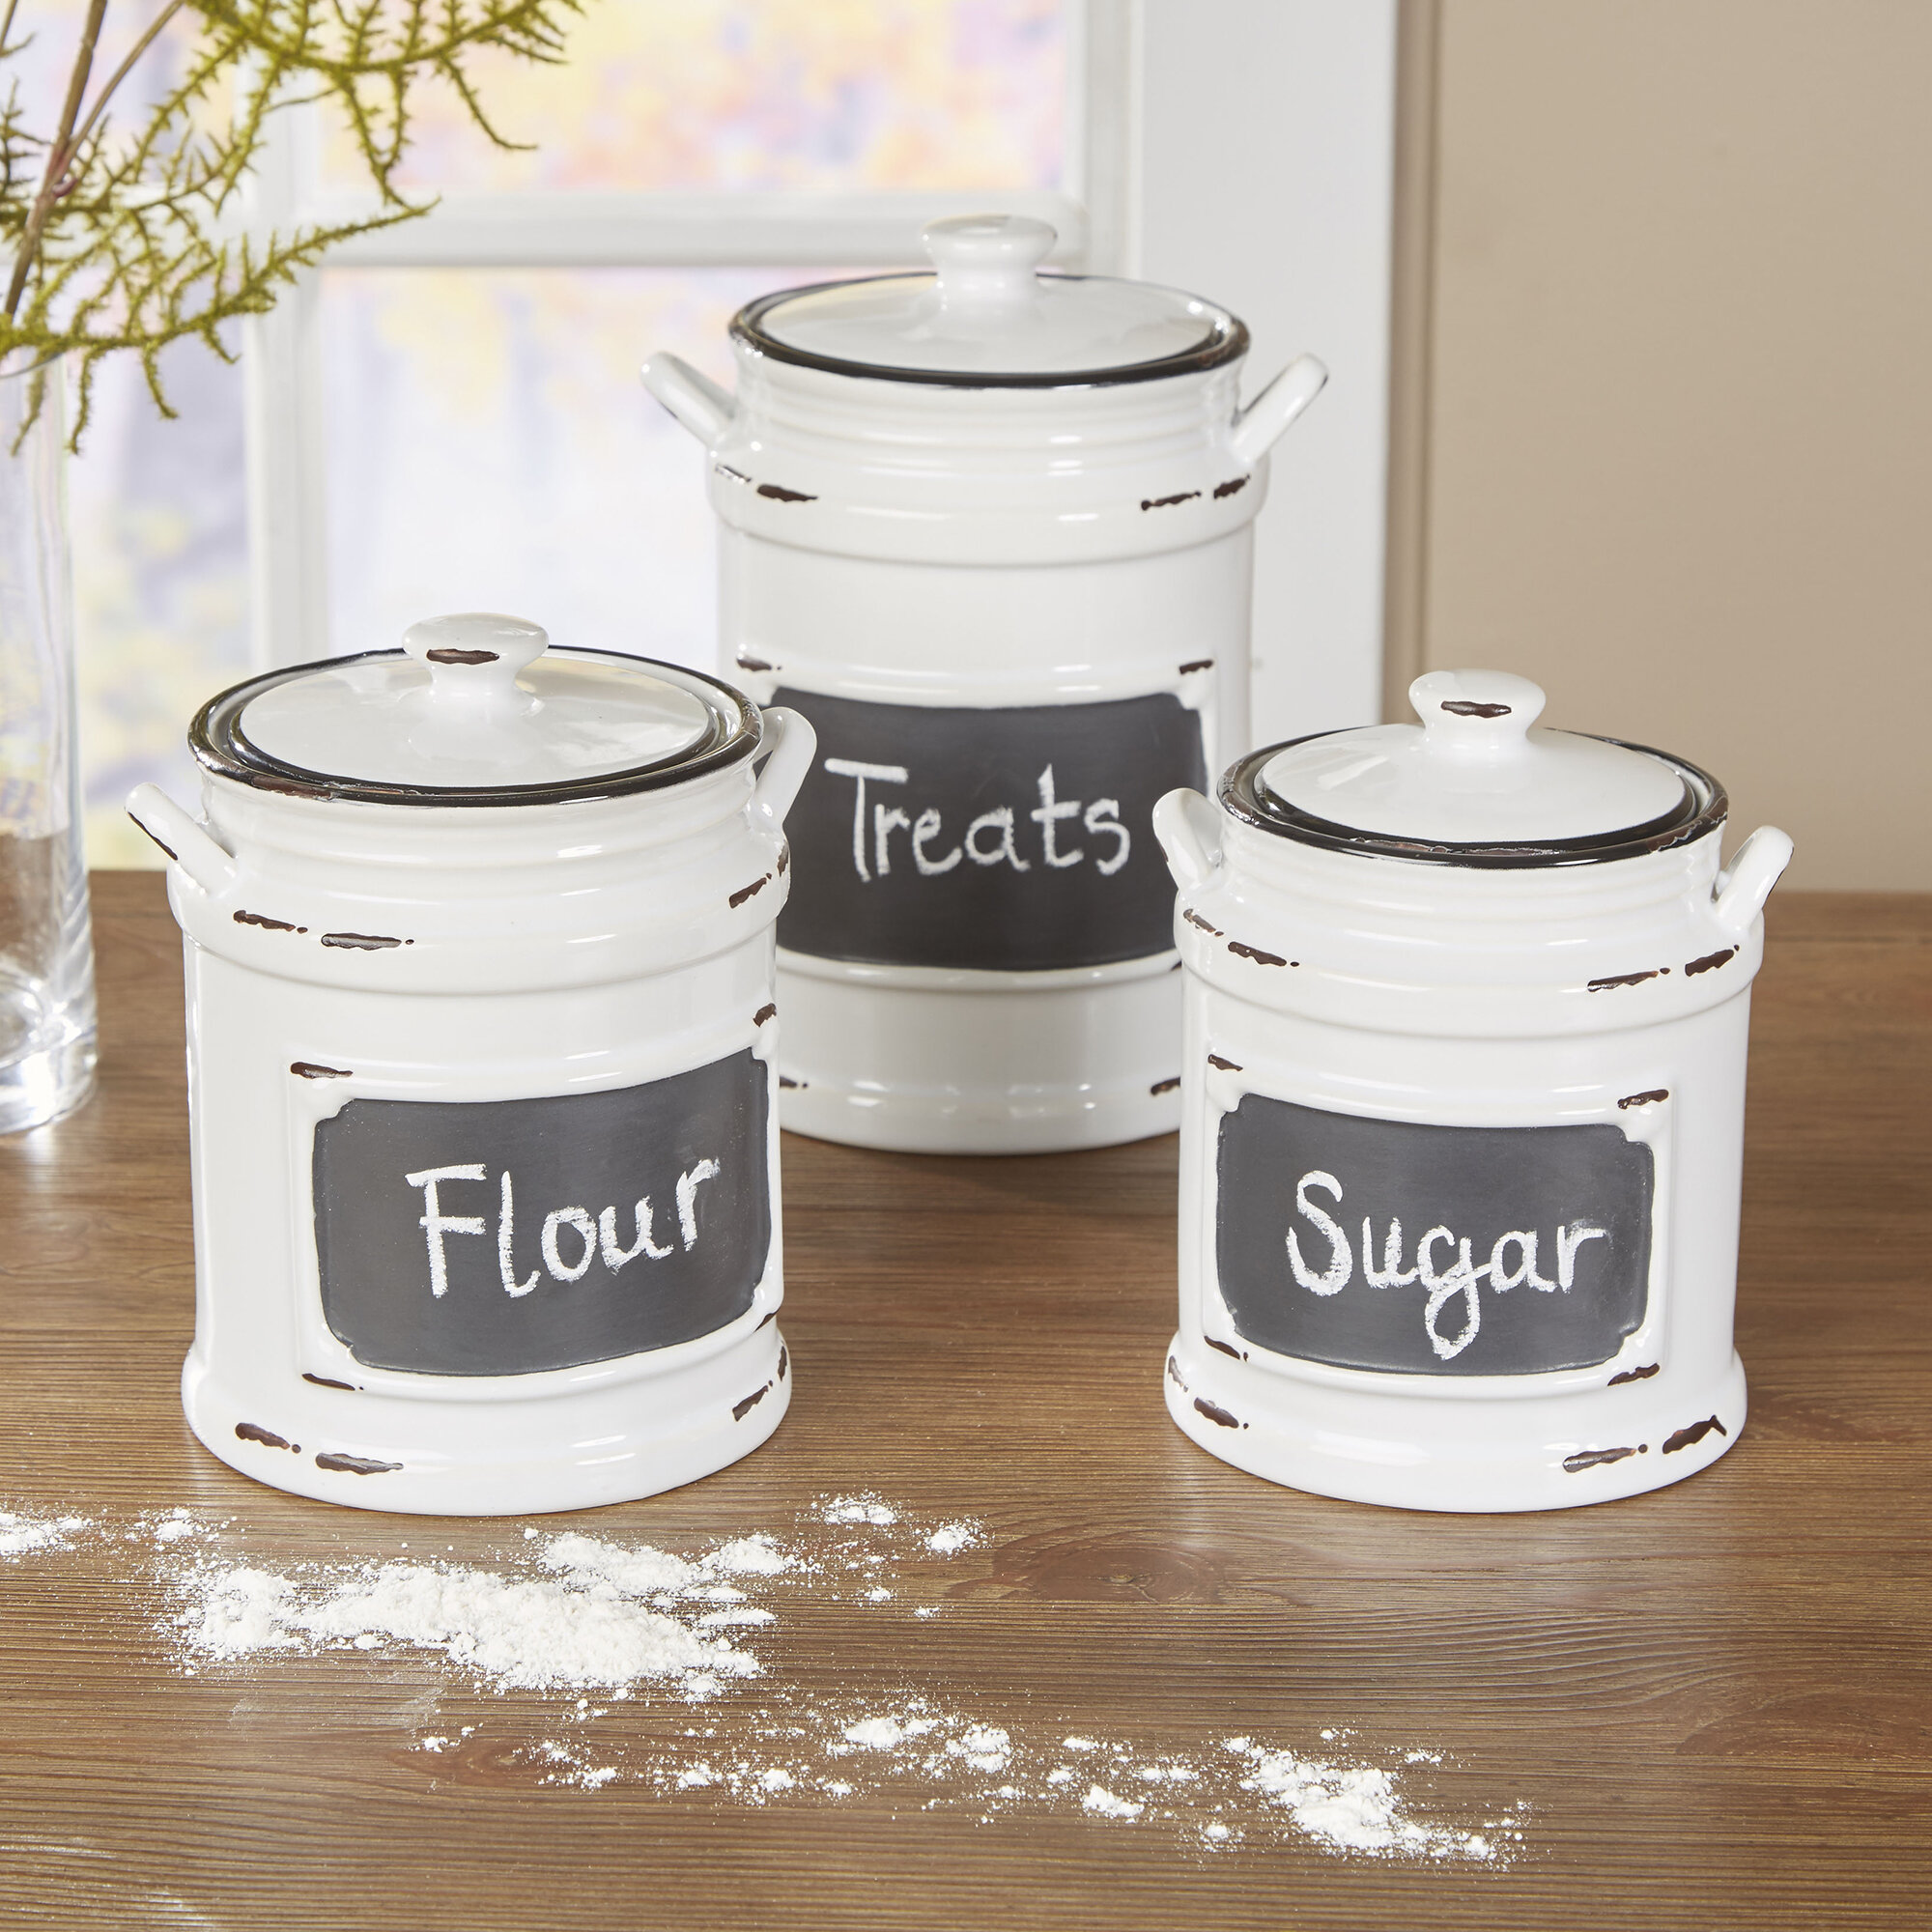 Decorative Farmhouse Style Kitchen Canister Sets - Reviews ...